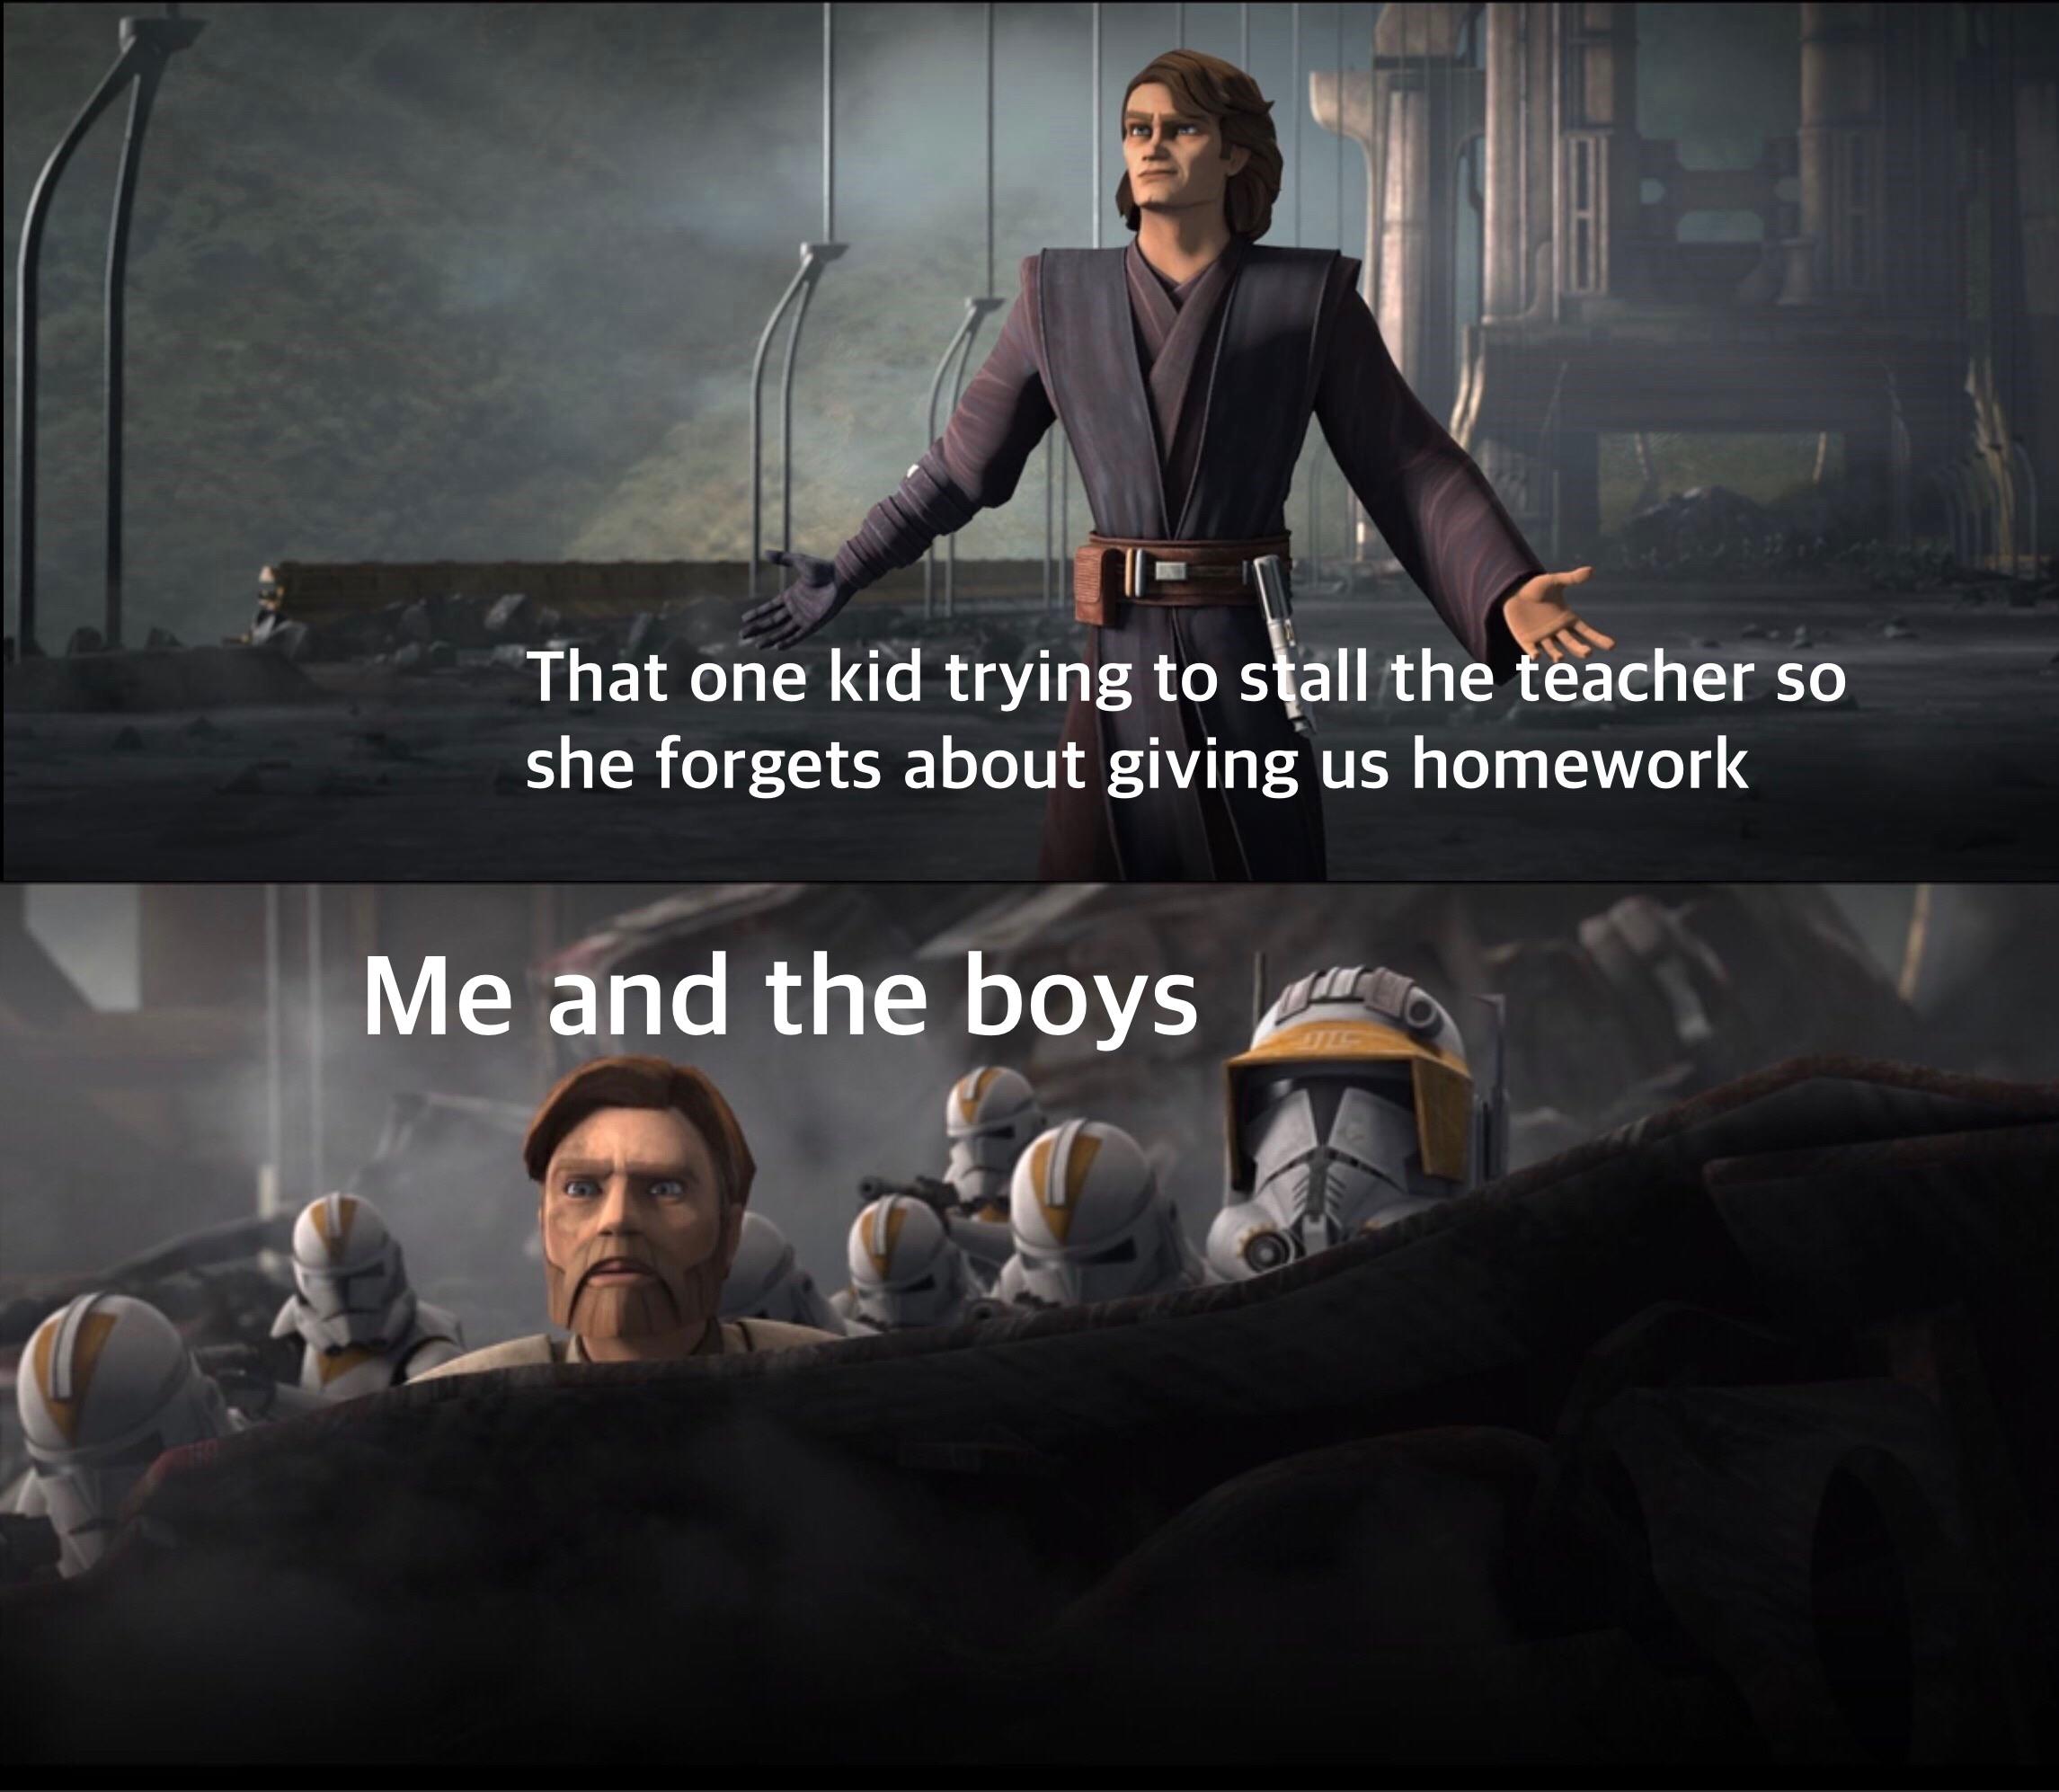 Prequel-memes, Wednesday, PrequelMemes, Messiah Star Wars Memes Prequel-memes, Wednesday, PrequelMemes, Messiah text: That one kid trying to s all the eacher so she forgets about giving us homework 